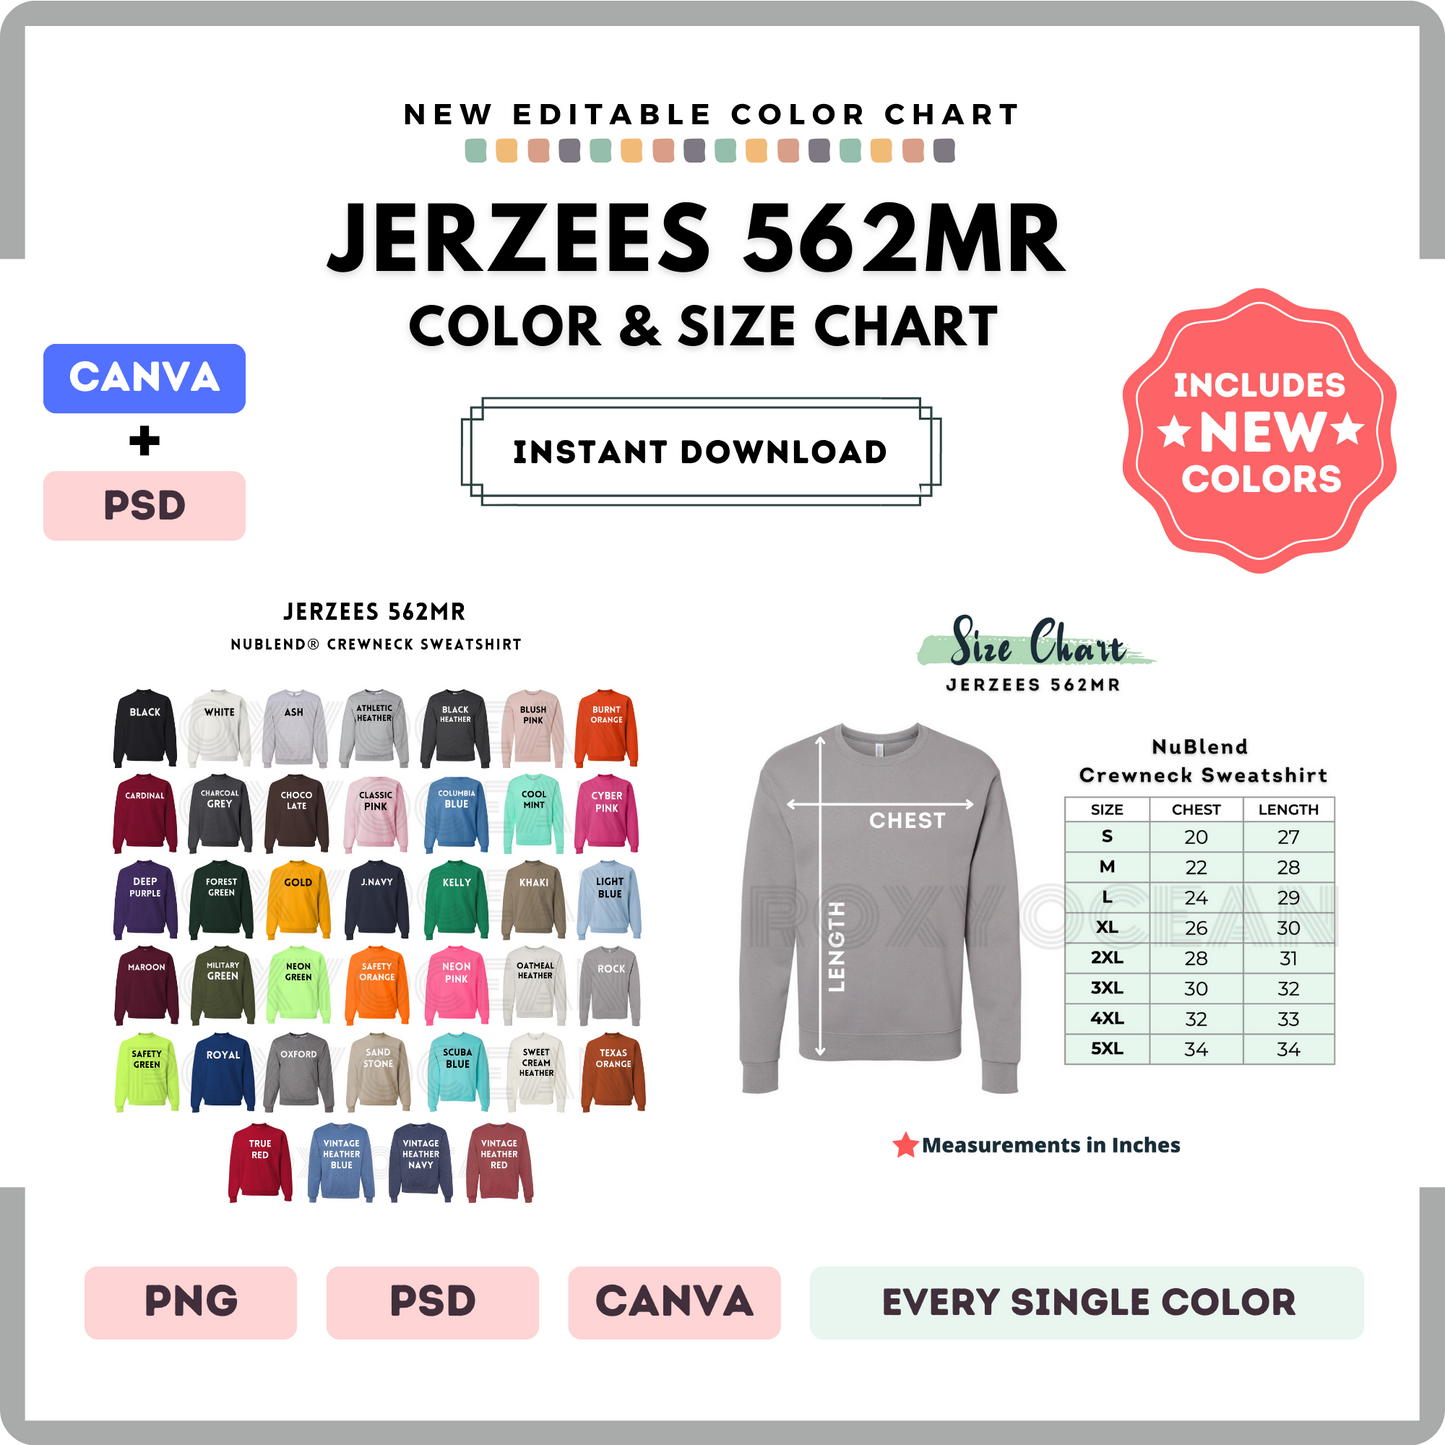 Jerzees 562MR Color and Size Chart